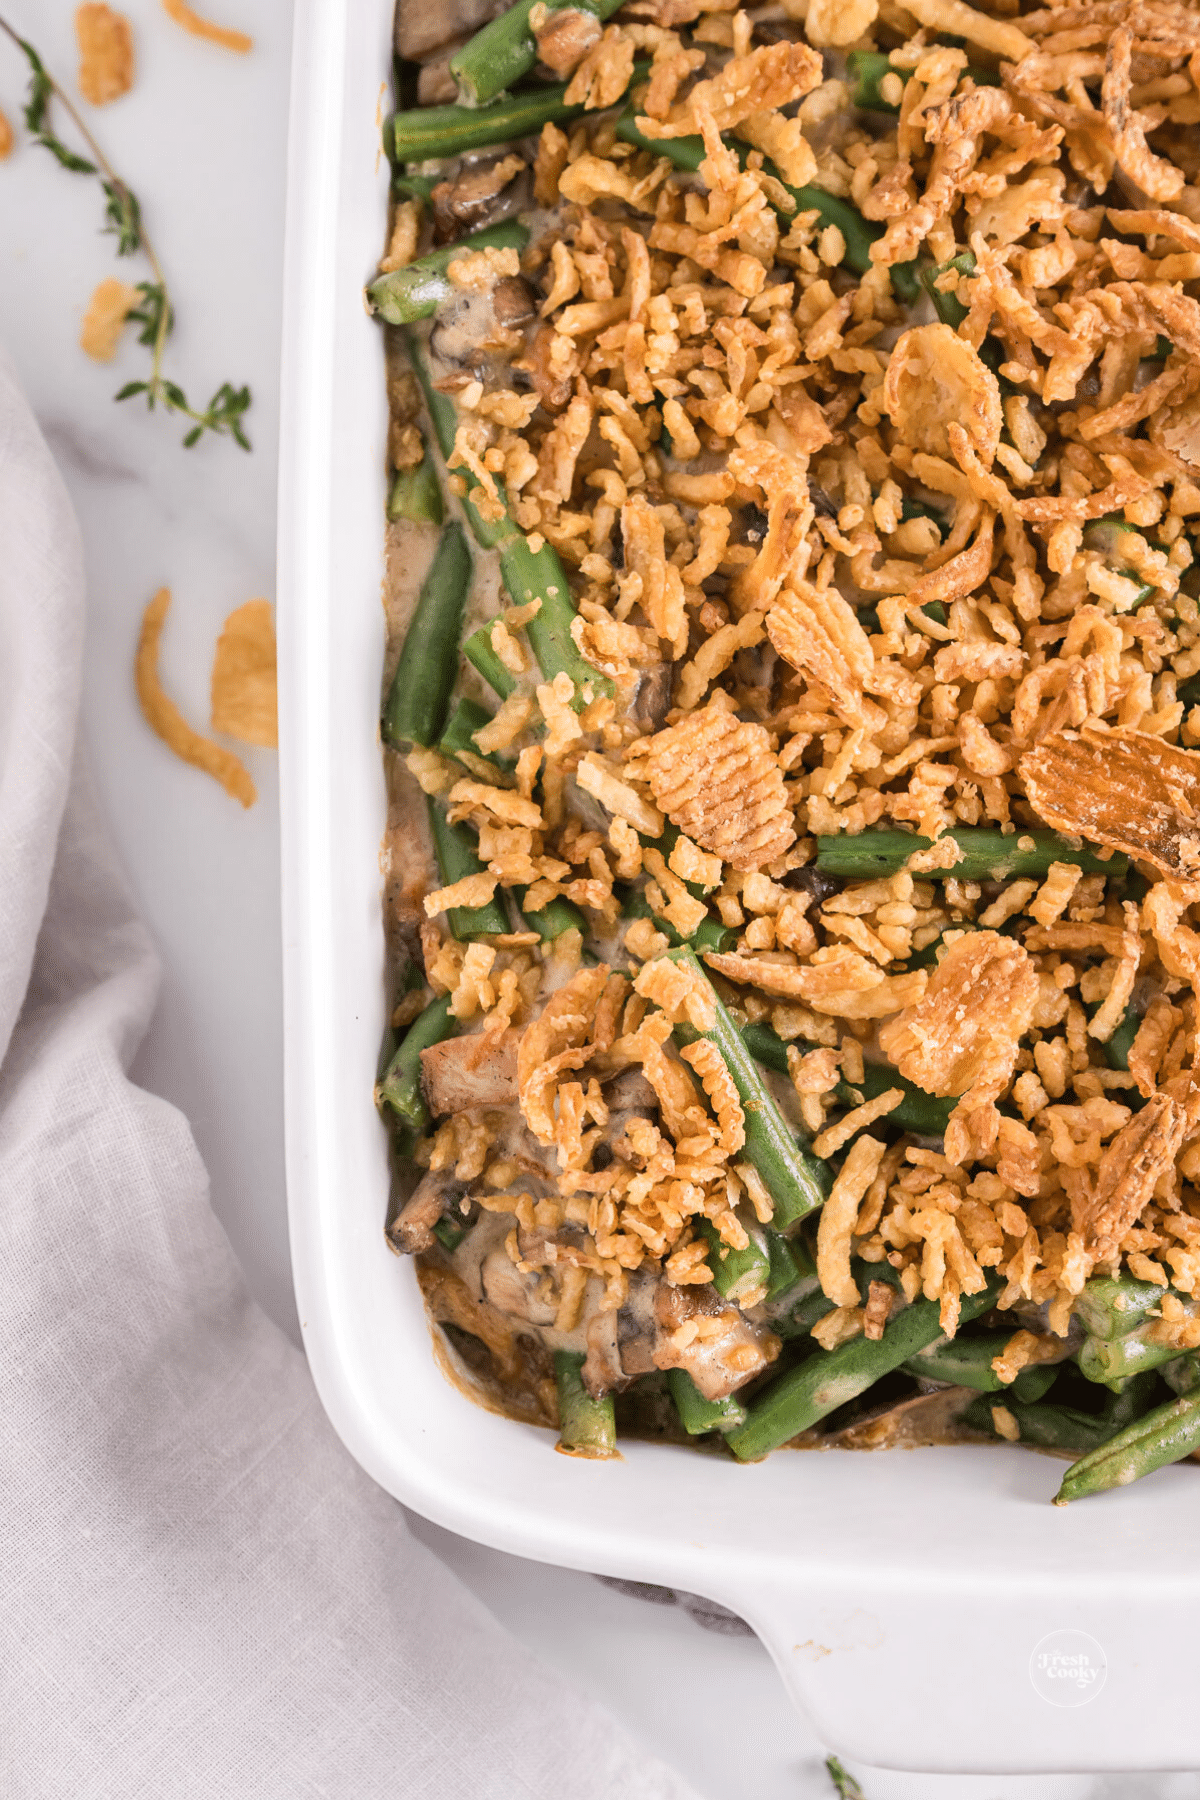 Green bean casserole with fried onions on top.